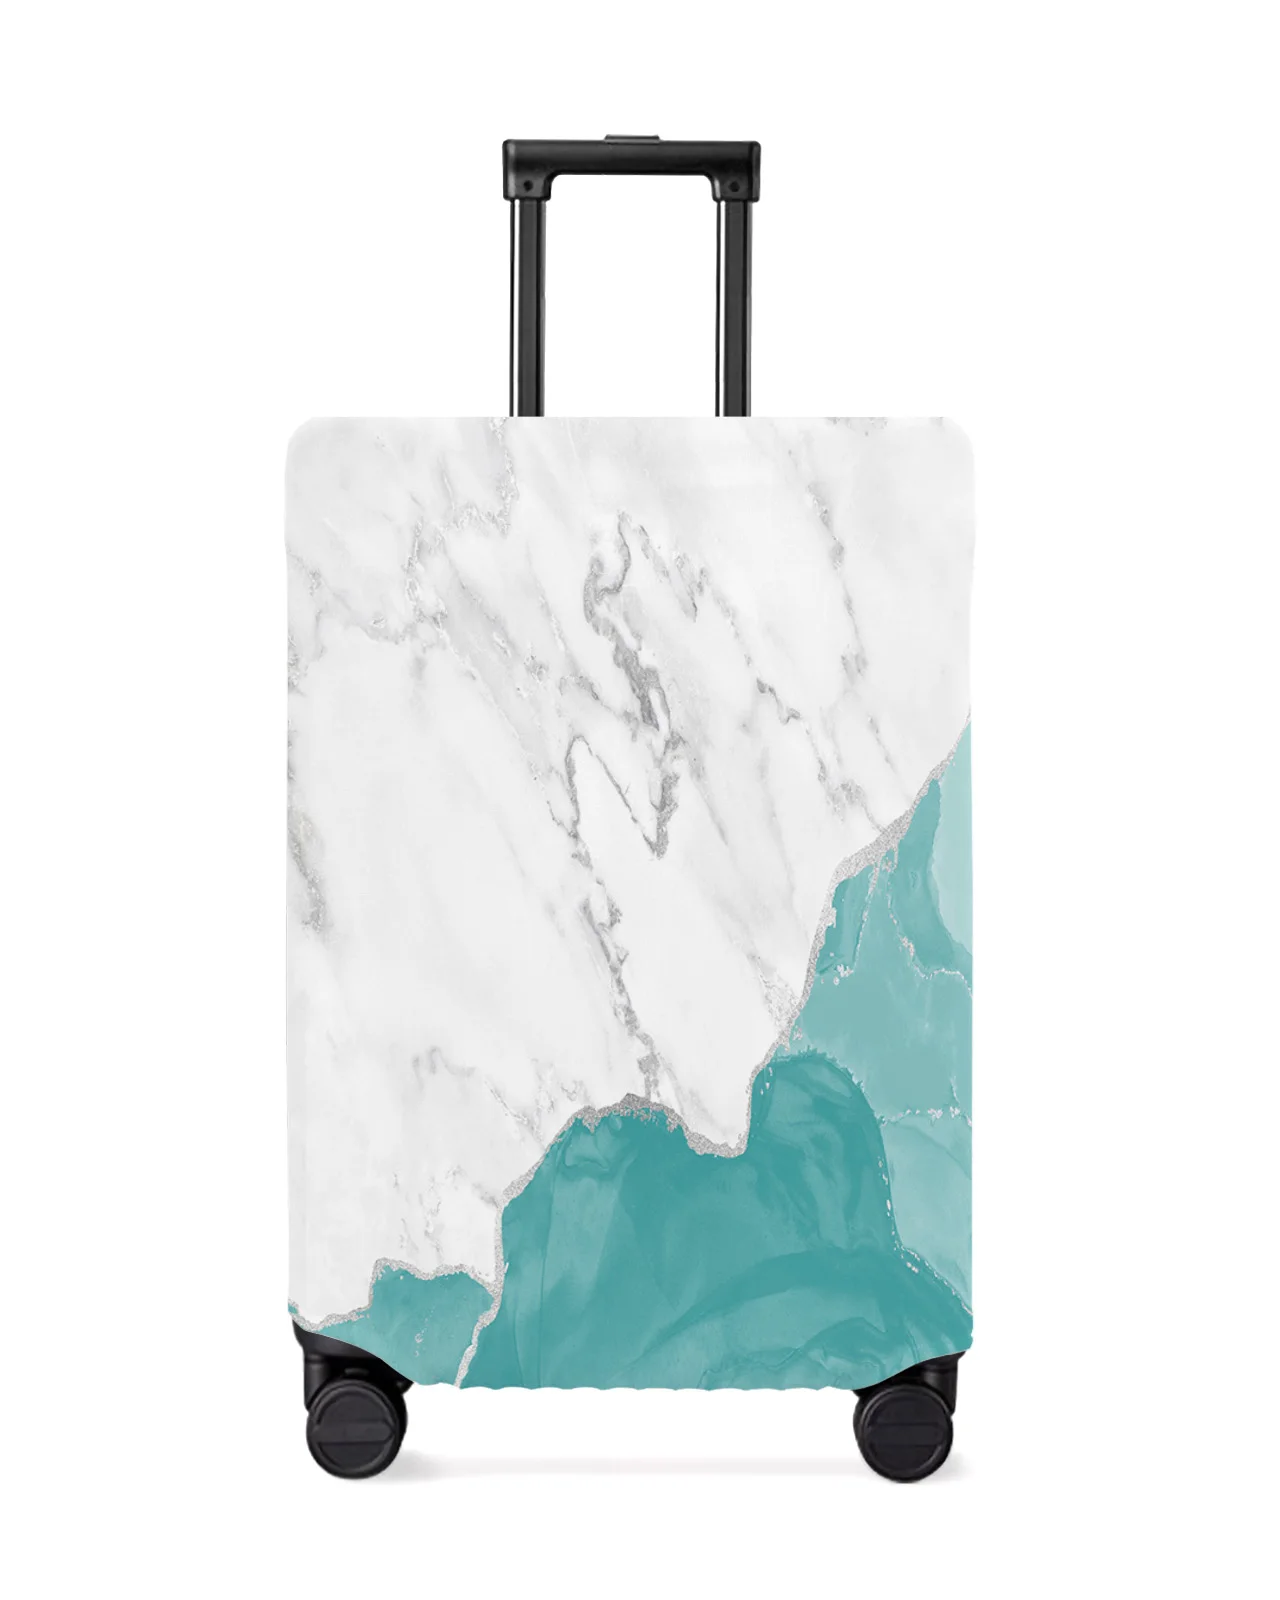 white-marble-aqua-green-luggage-cover-stretch-suitcase-protector-baggage-dust-case-cover-for-18-32-inch-travel-suitcase-case